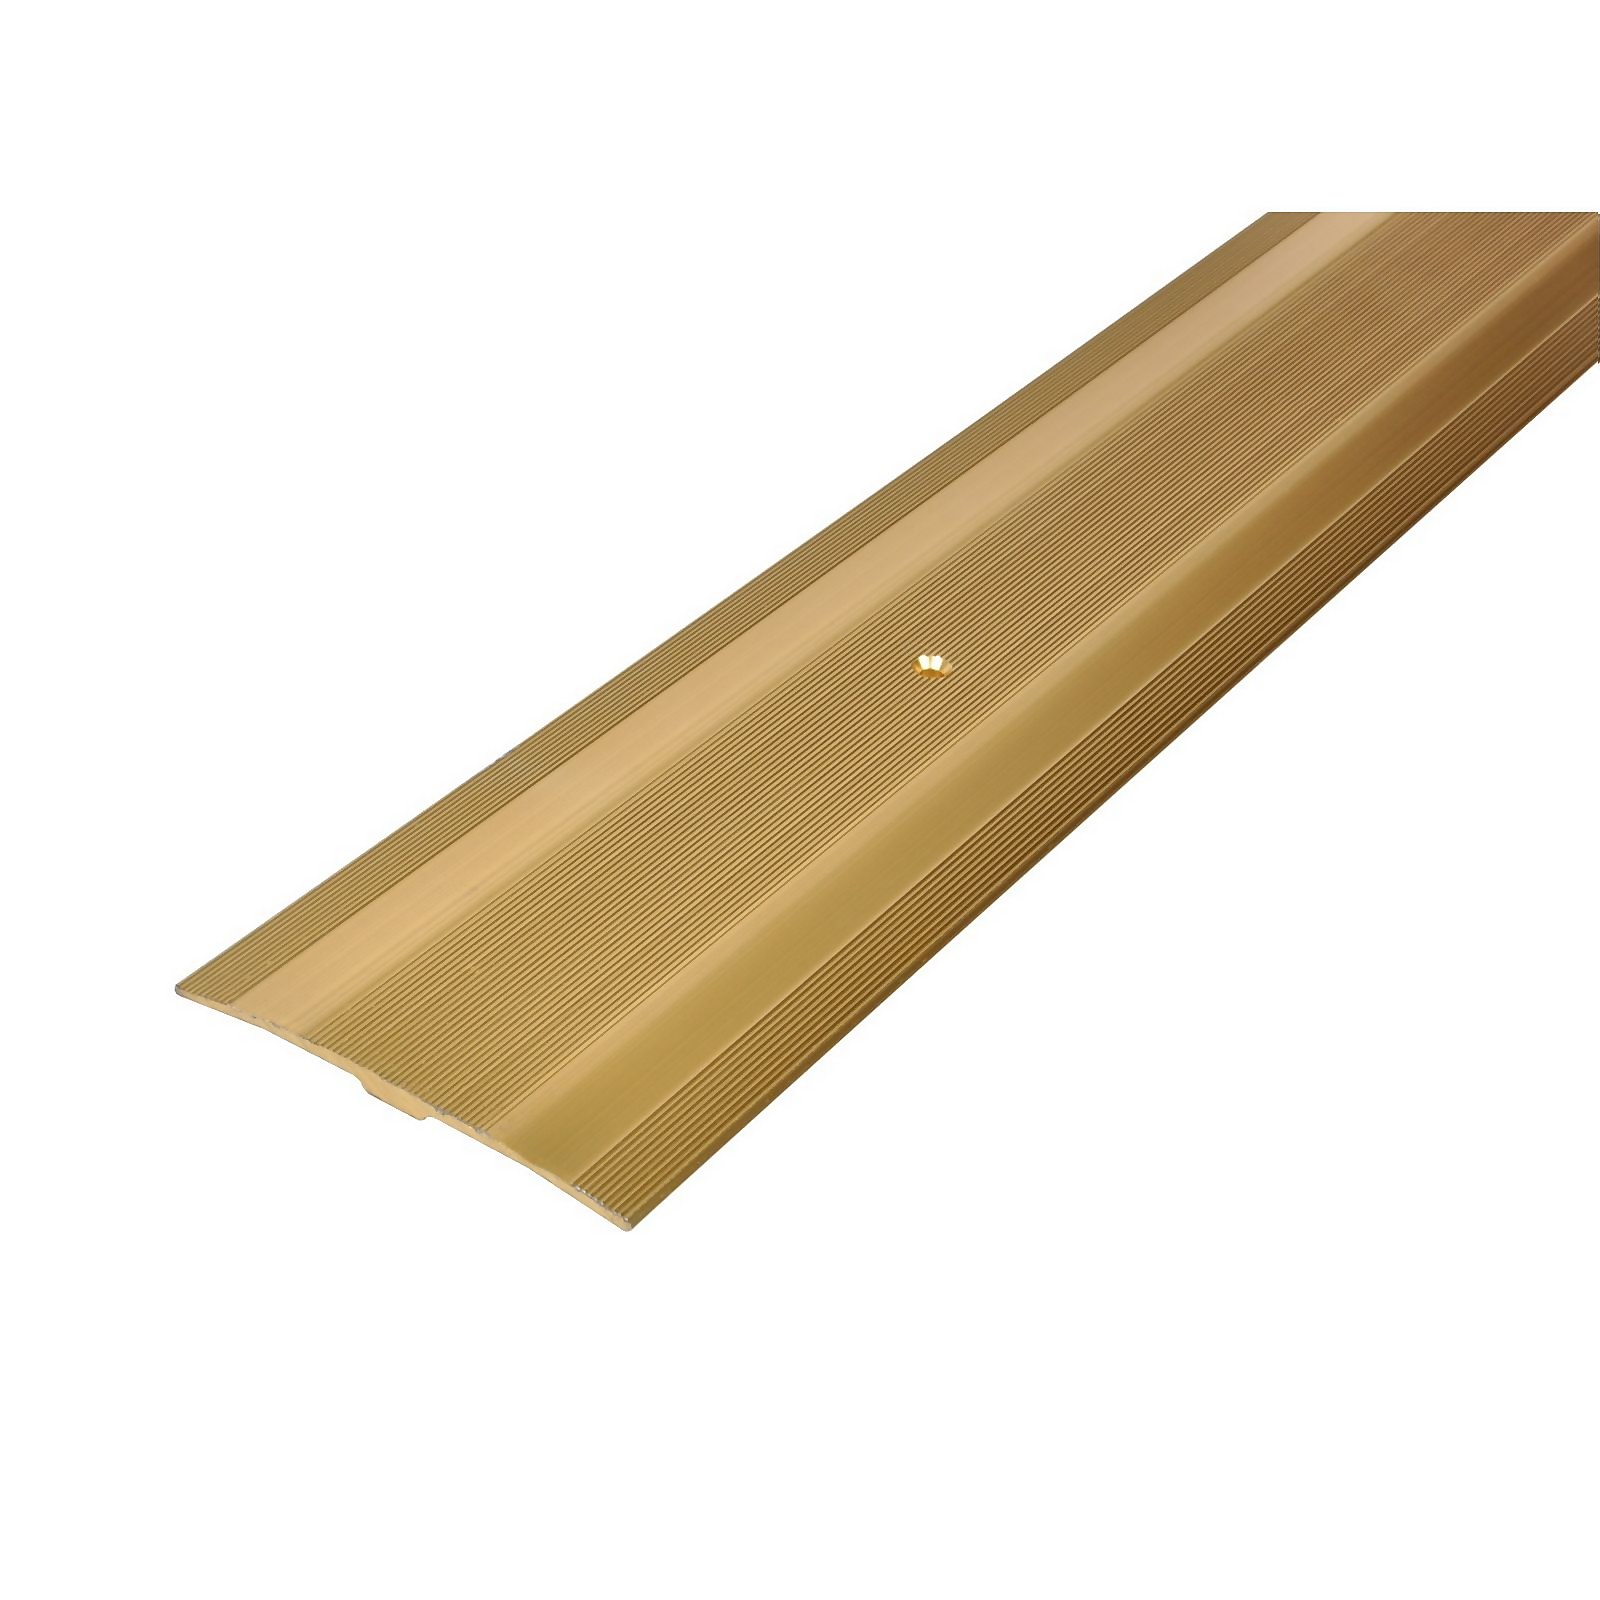 Photo of Extra Wide Cover Strip Carpet Edge - Gold 900mm